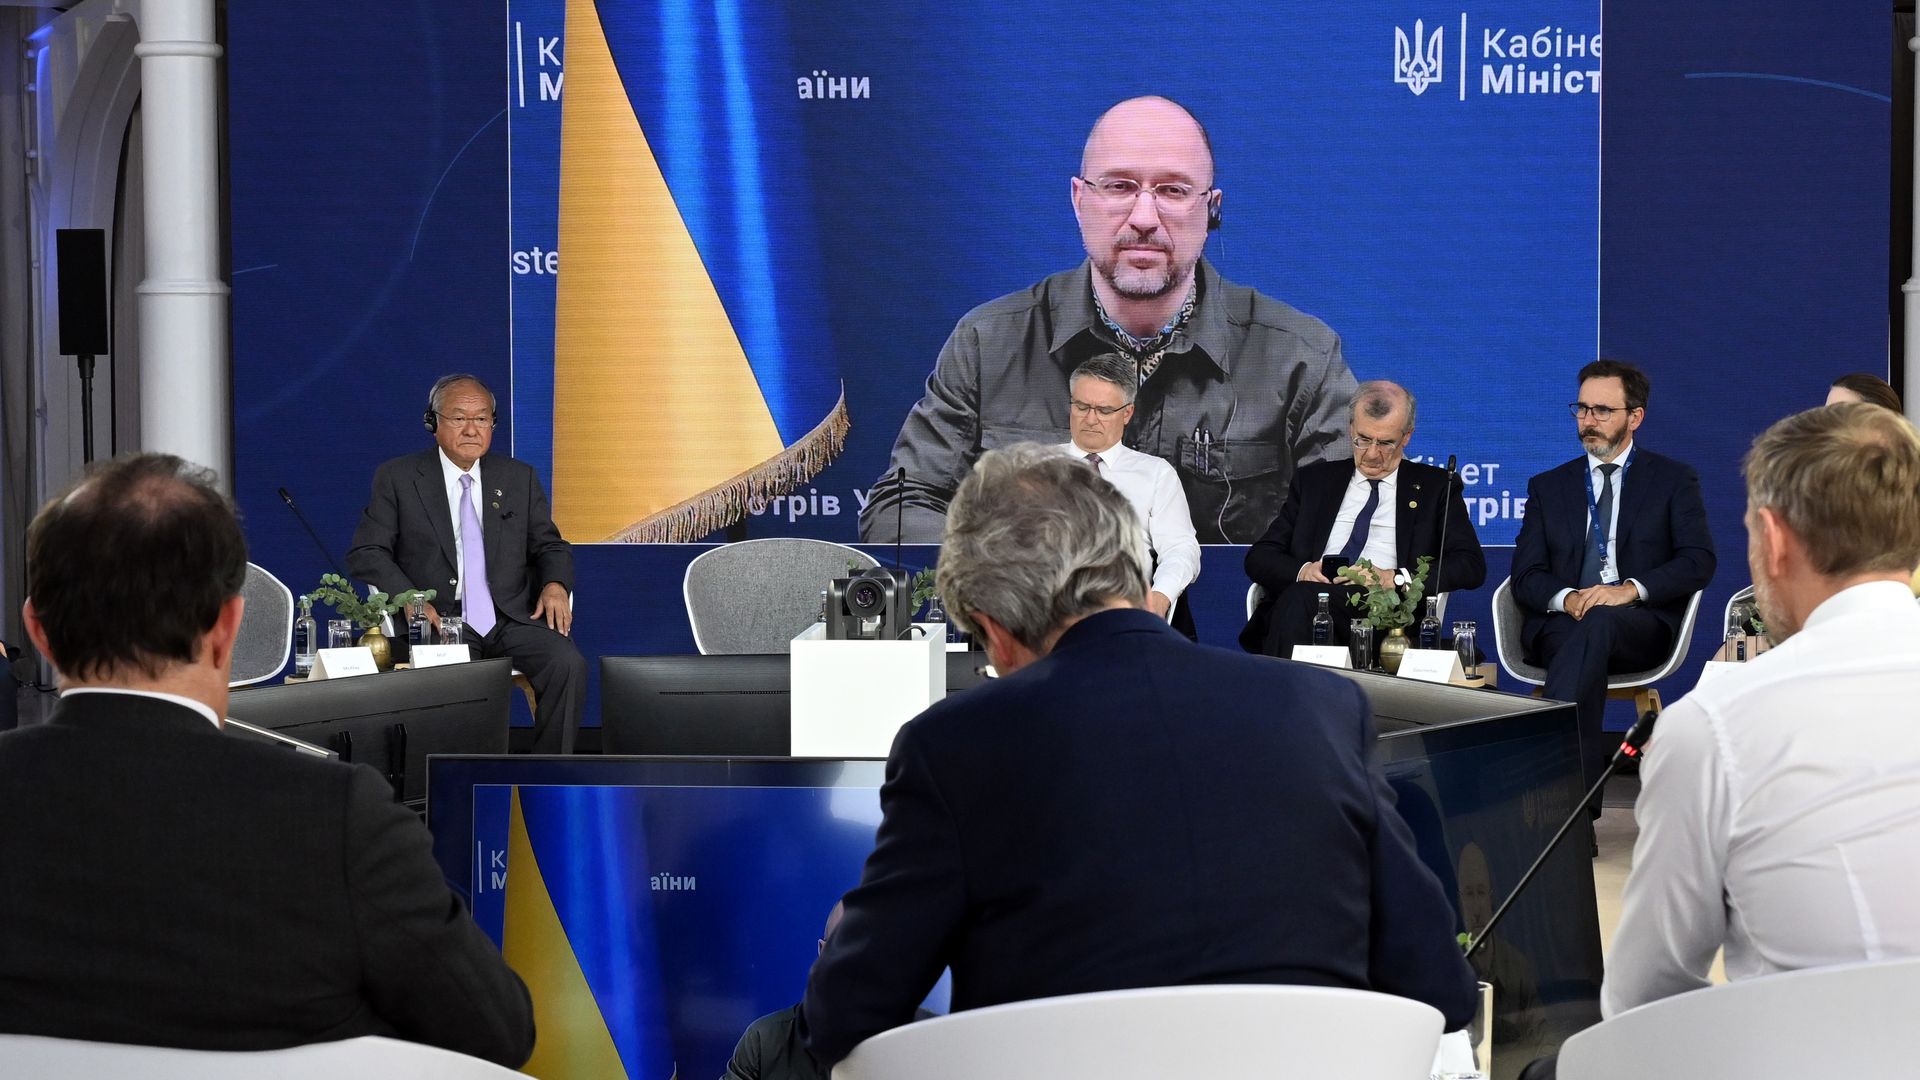 Denys Shmyhal, Ukraine's prime minister, virtually attending a meeting with G7 finance ministers and central bank governors in Germany, on May 19.